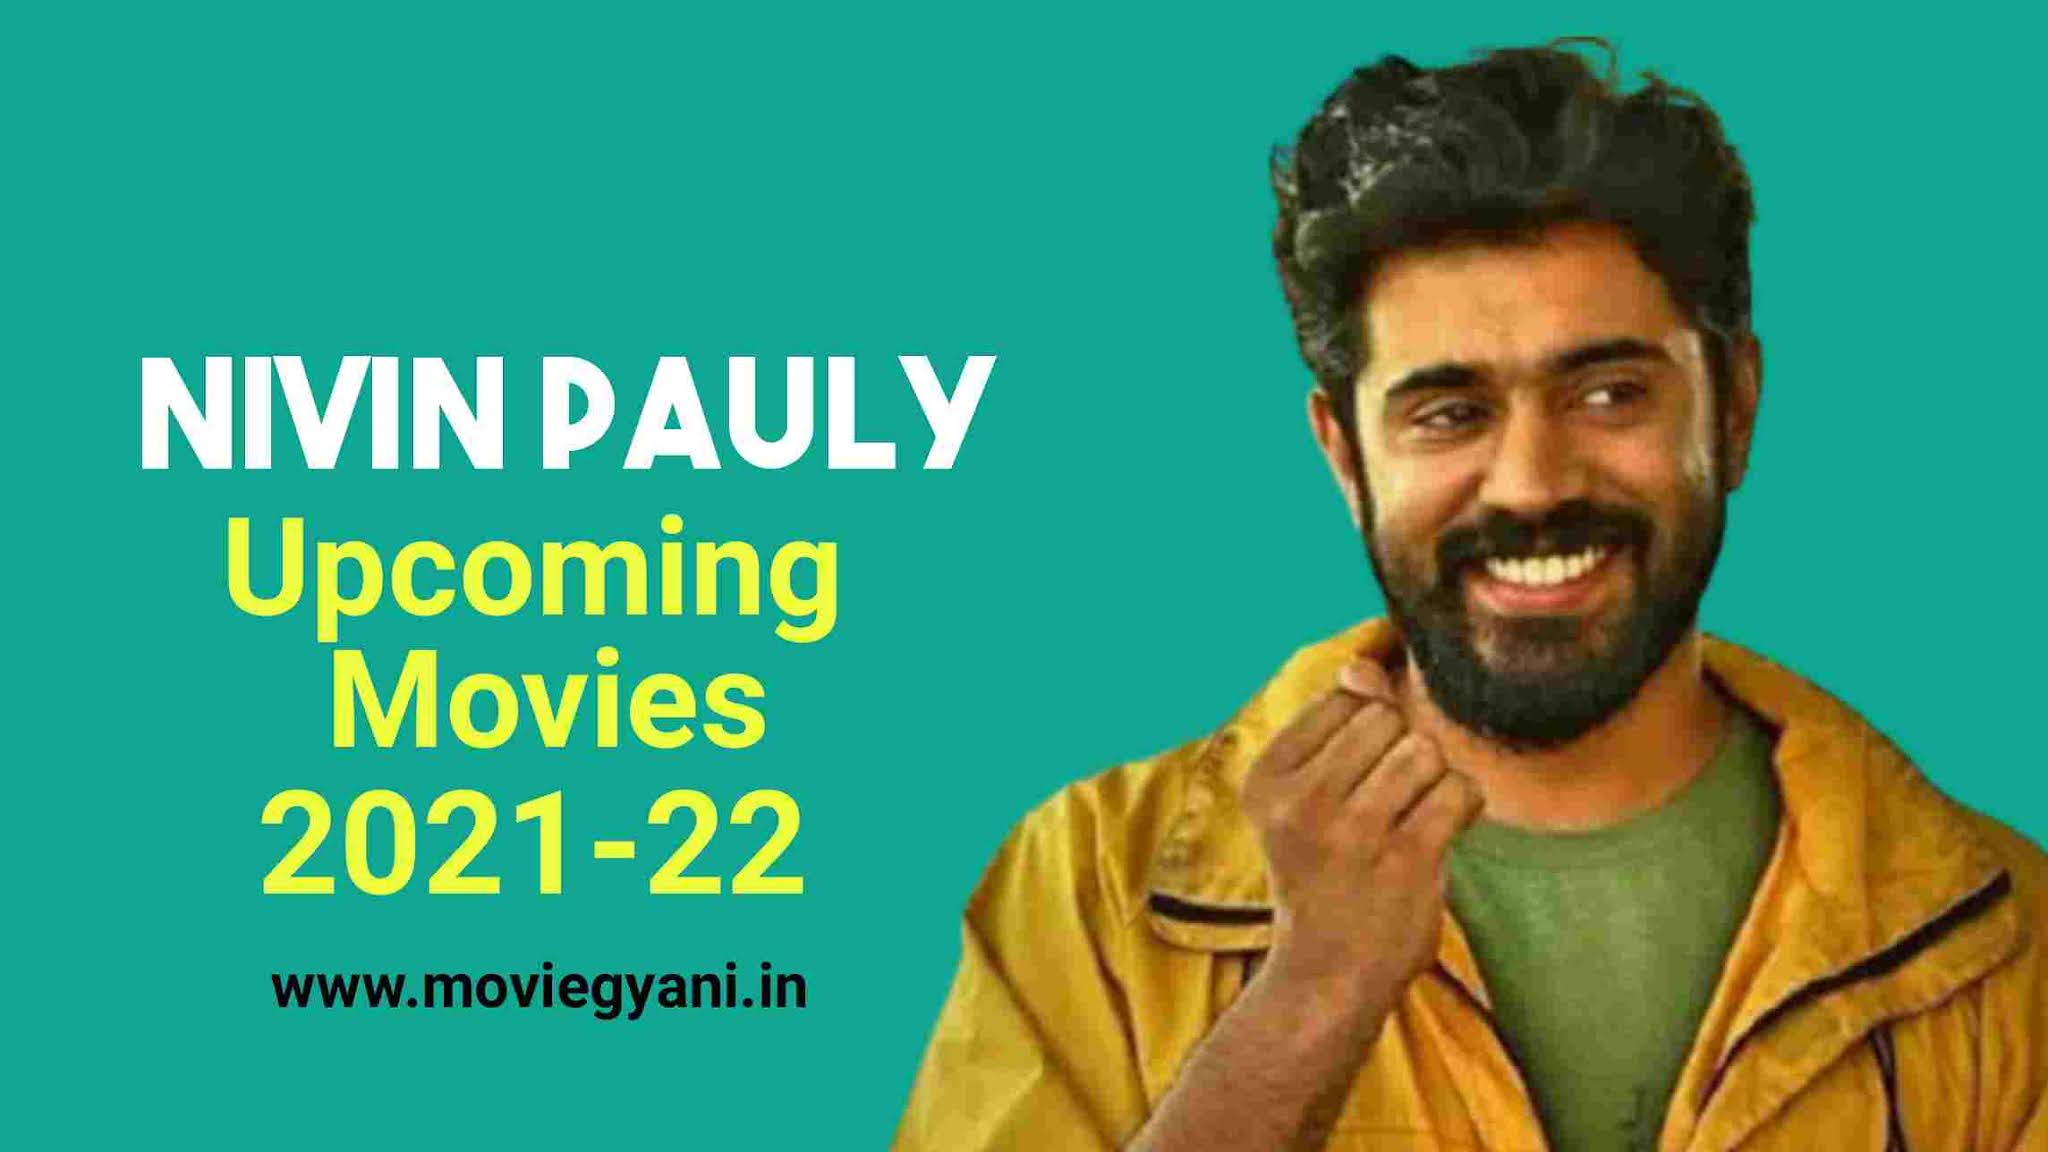 Nivin Pauly Upcoming Movies List And Release Date 2021-22